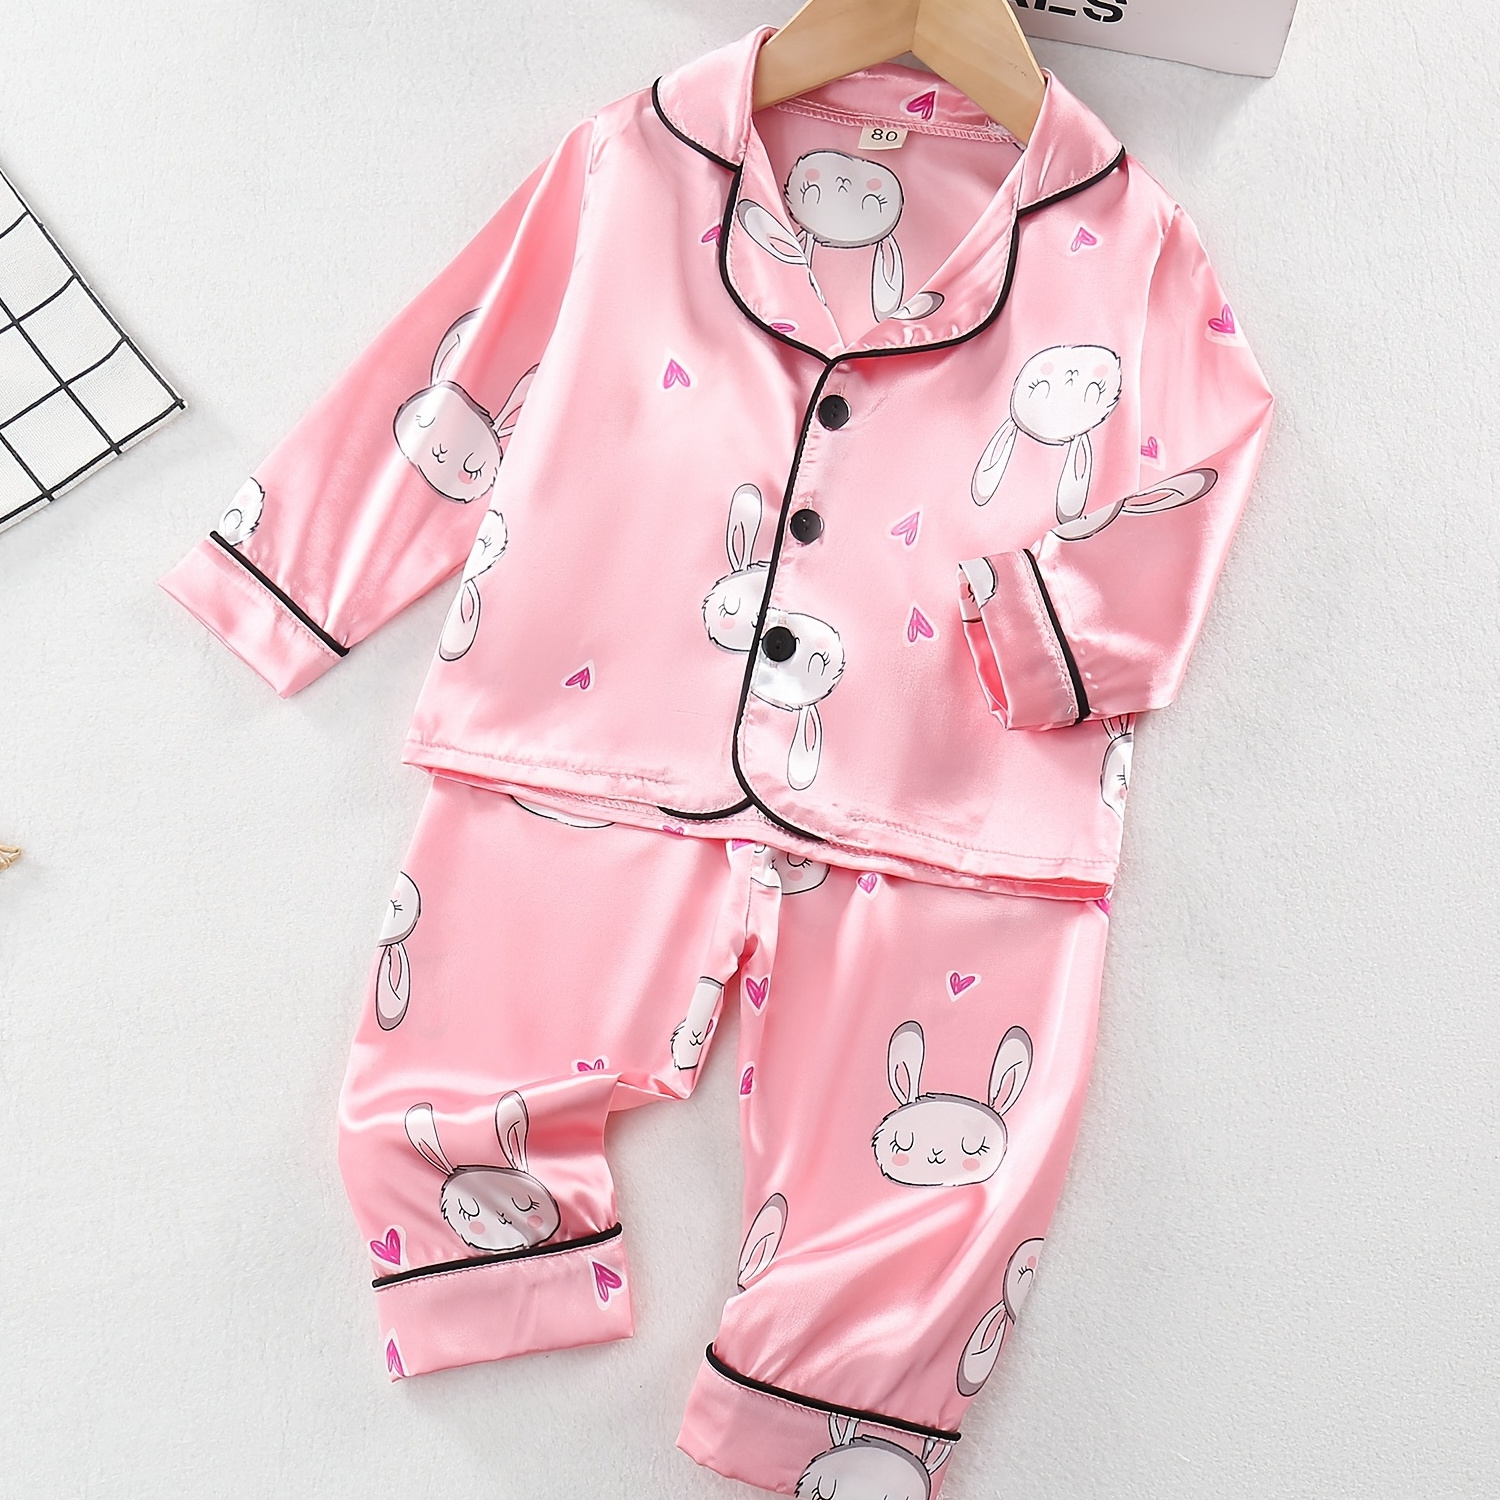 

Girl's Cartoon Rabbit Pattern 2pcs, Button Front Long Sleeve Top & Pants Set, Soft Comfy Casual Outfits, Kids Loungewear For Spring Fall